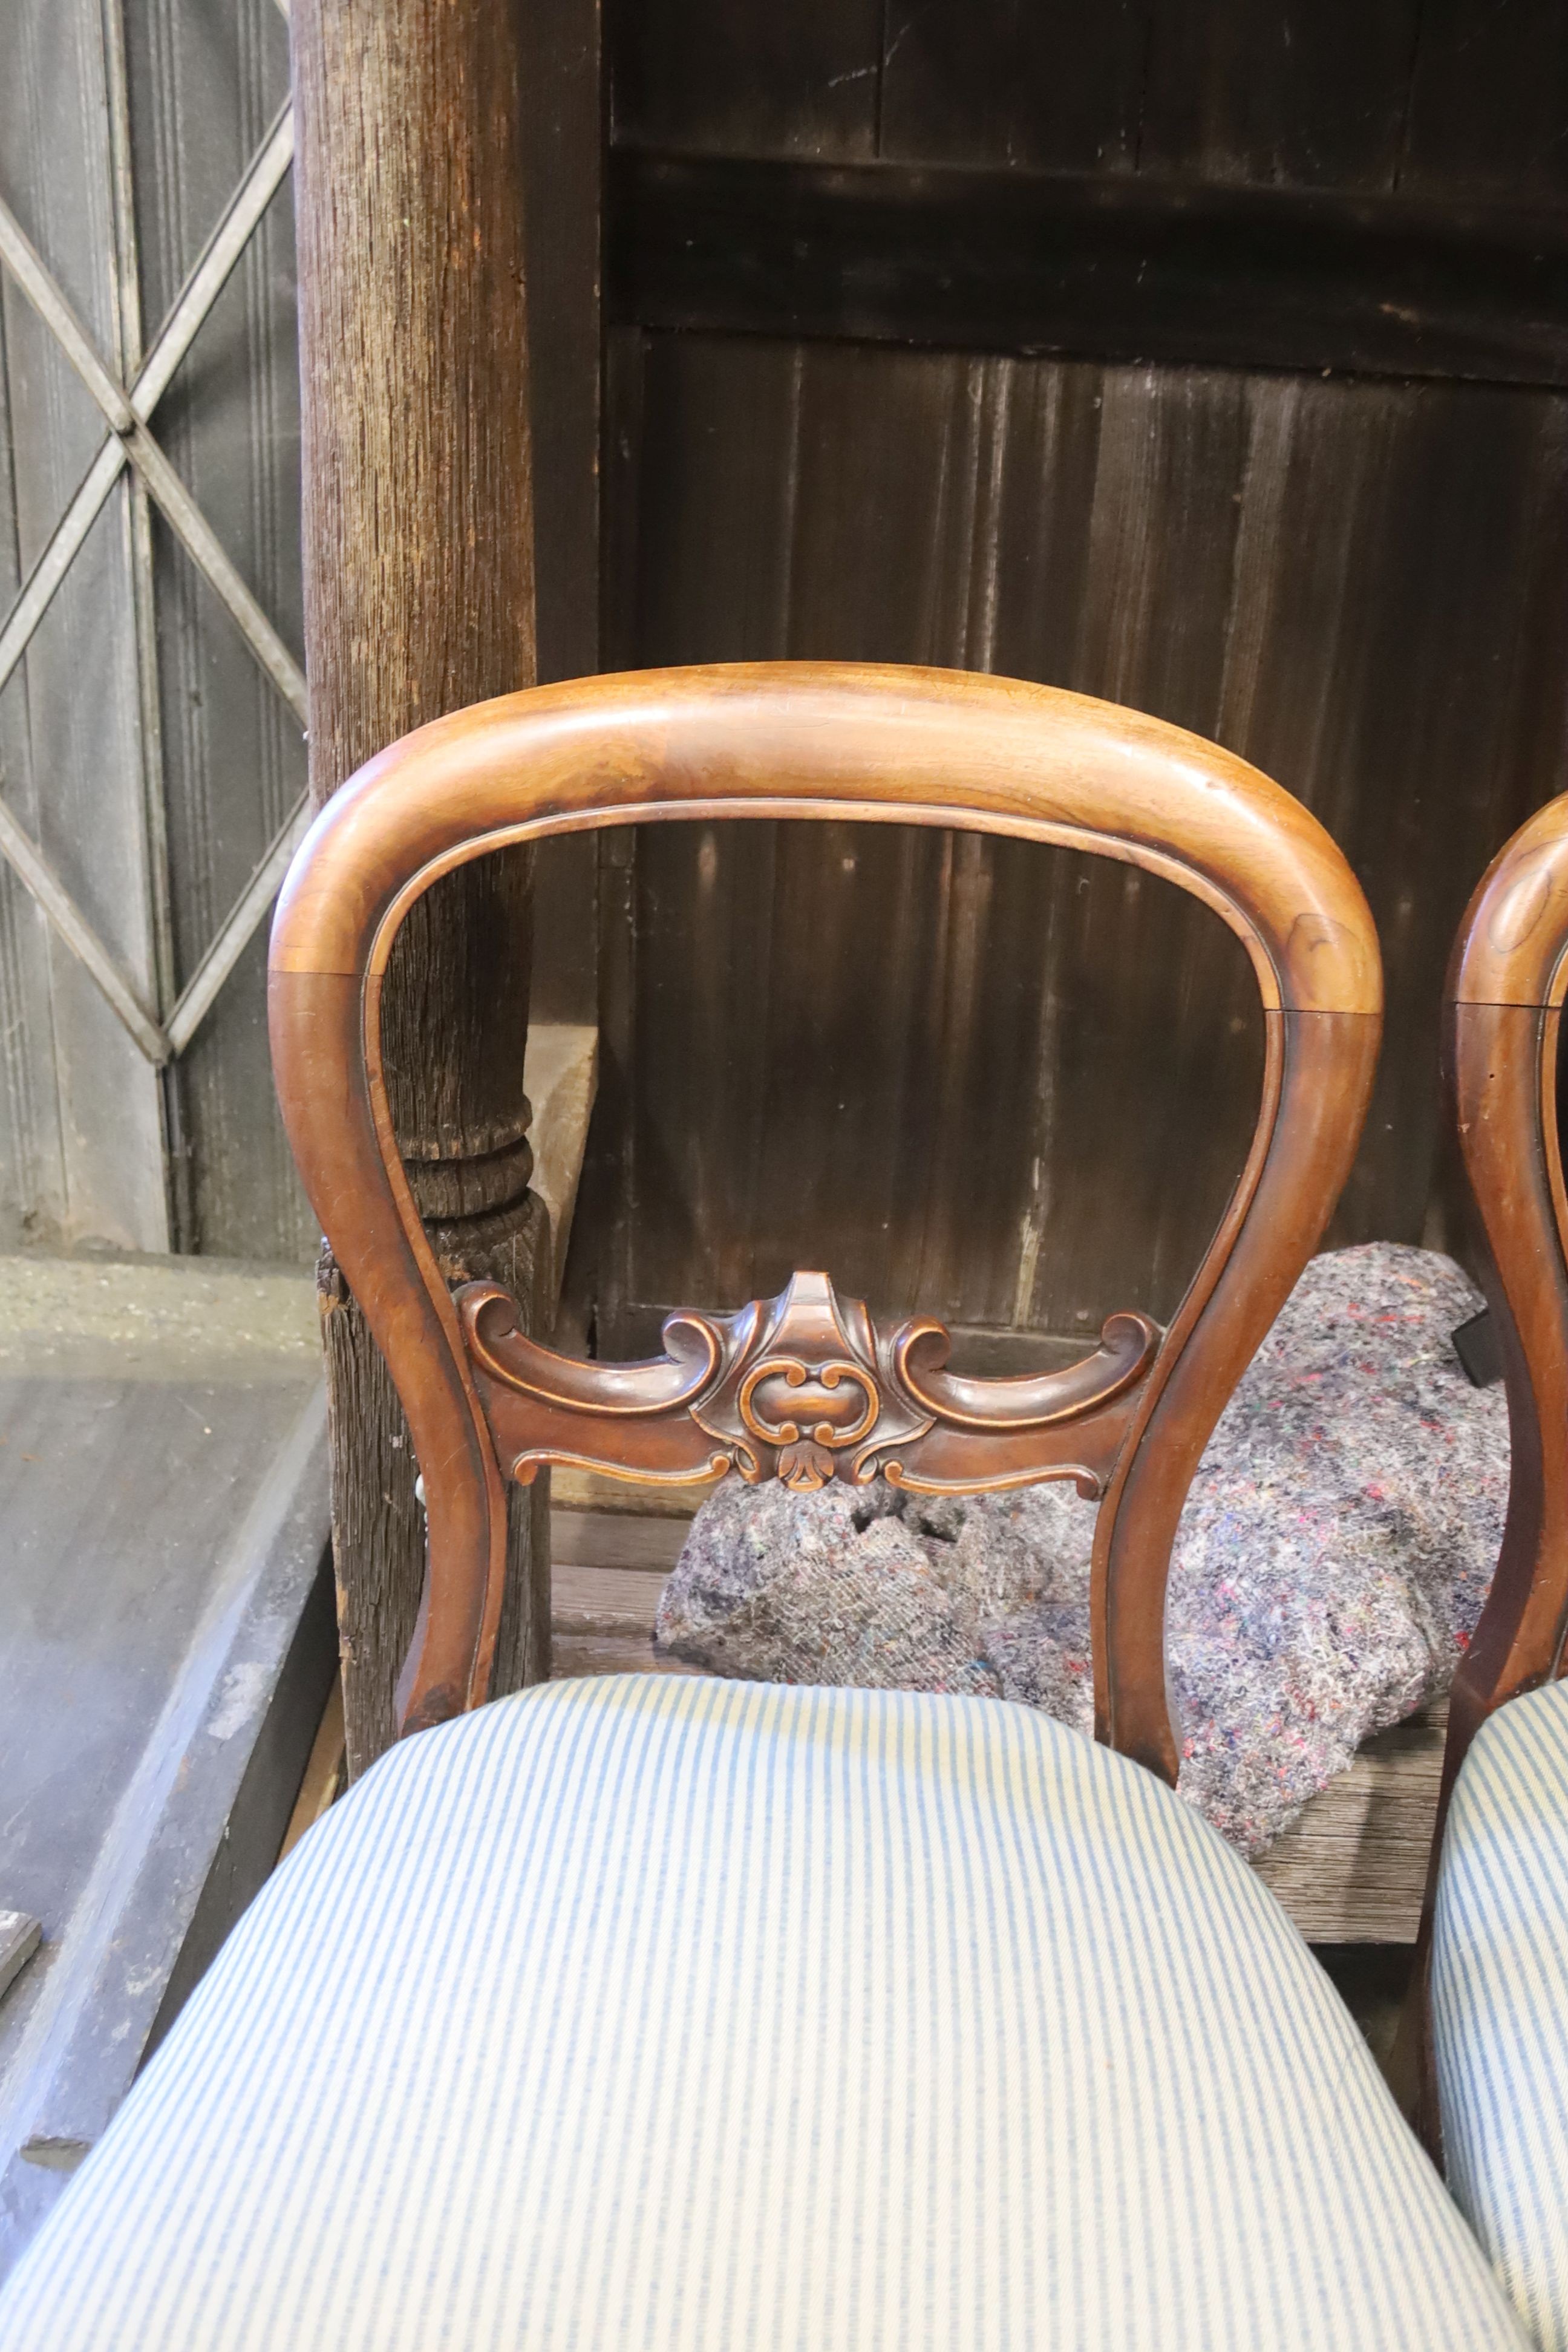 A set of four Victorian mahogany balloon back dining chairs (damage)